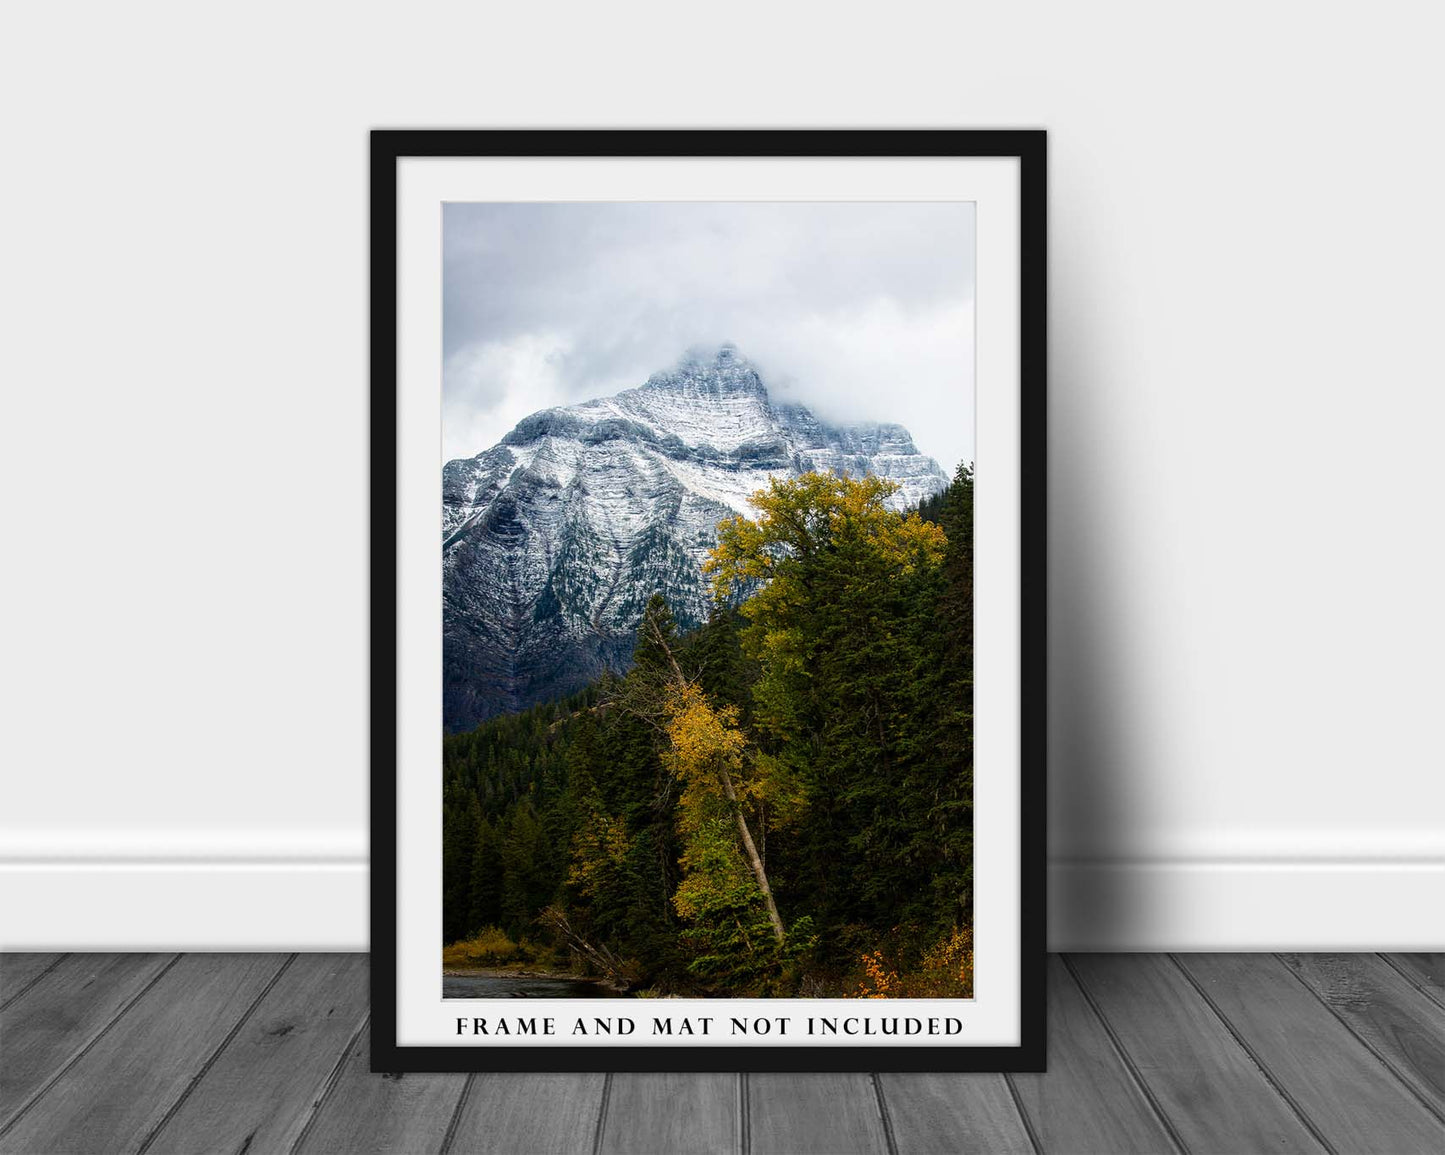 Rocky Mountain Wall Art Photography Print - Vertical Picture of Snowy Peak in Glacier National Park Montana Western Photo Artwork Decor